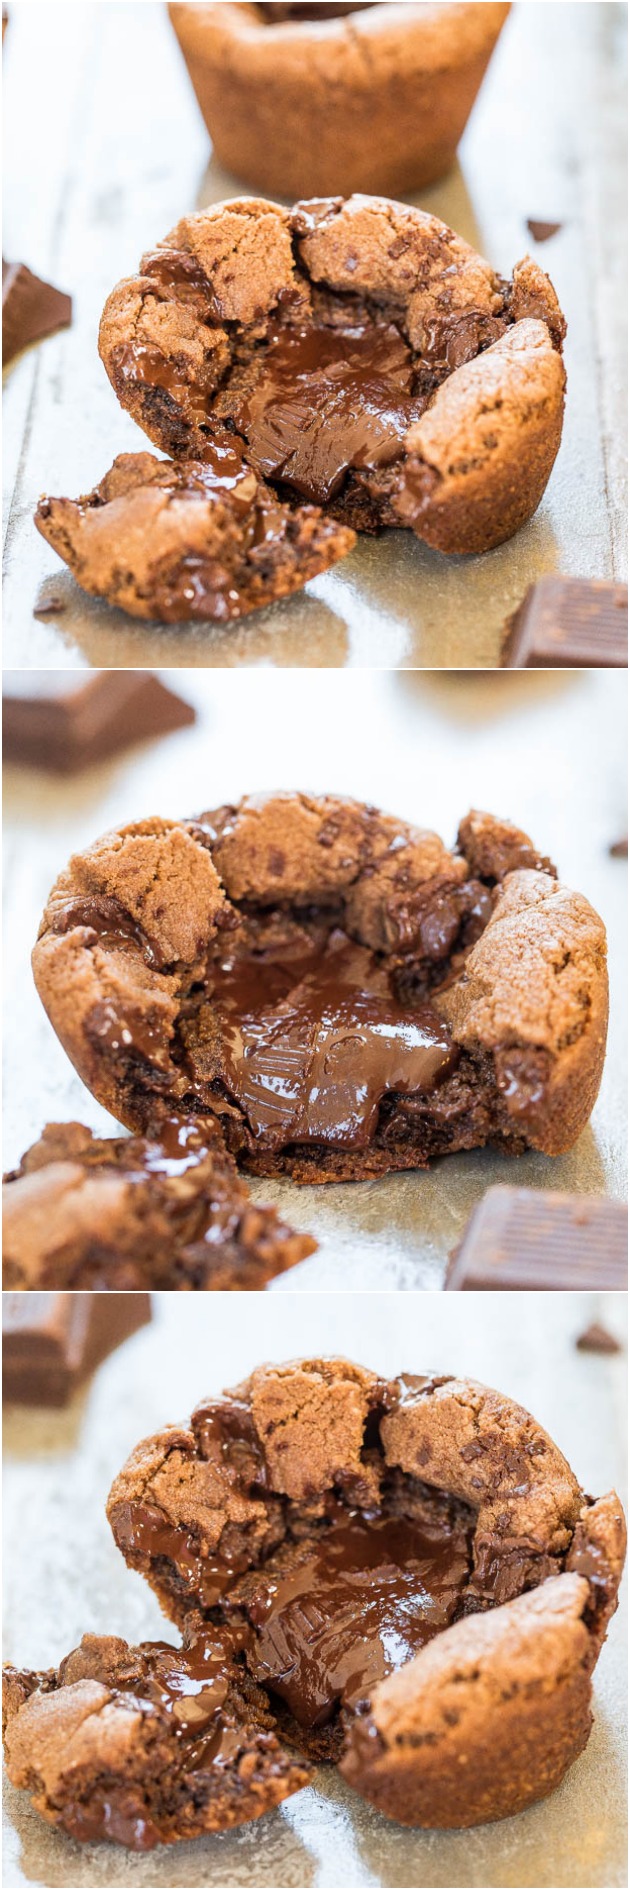 Chocolate Lava Nutella Cookies - Triple chocolate cookies with flowing, melted dark chocolate in the middle! Out of this world good!